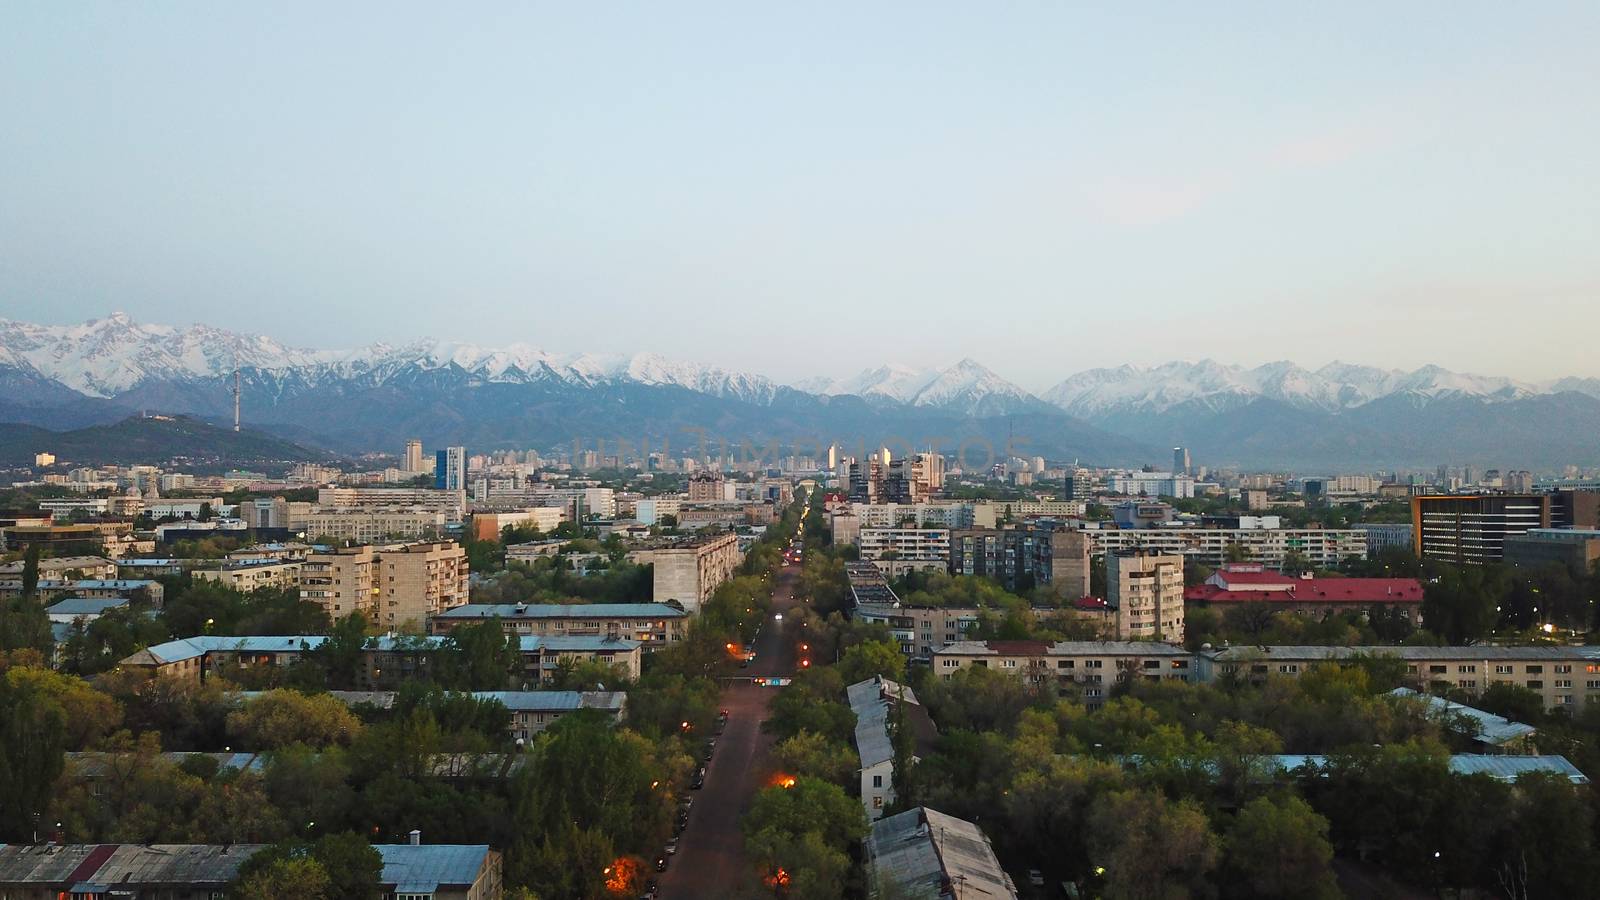 View of the snowy mountains of the TRANS-ili Alatau and the city of Almaty. Clear blue sky, lights are on in the city, cars are driving on the road. Courtyards and streets of the city are illuminated